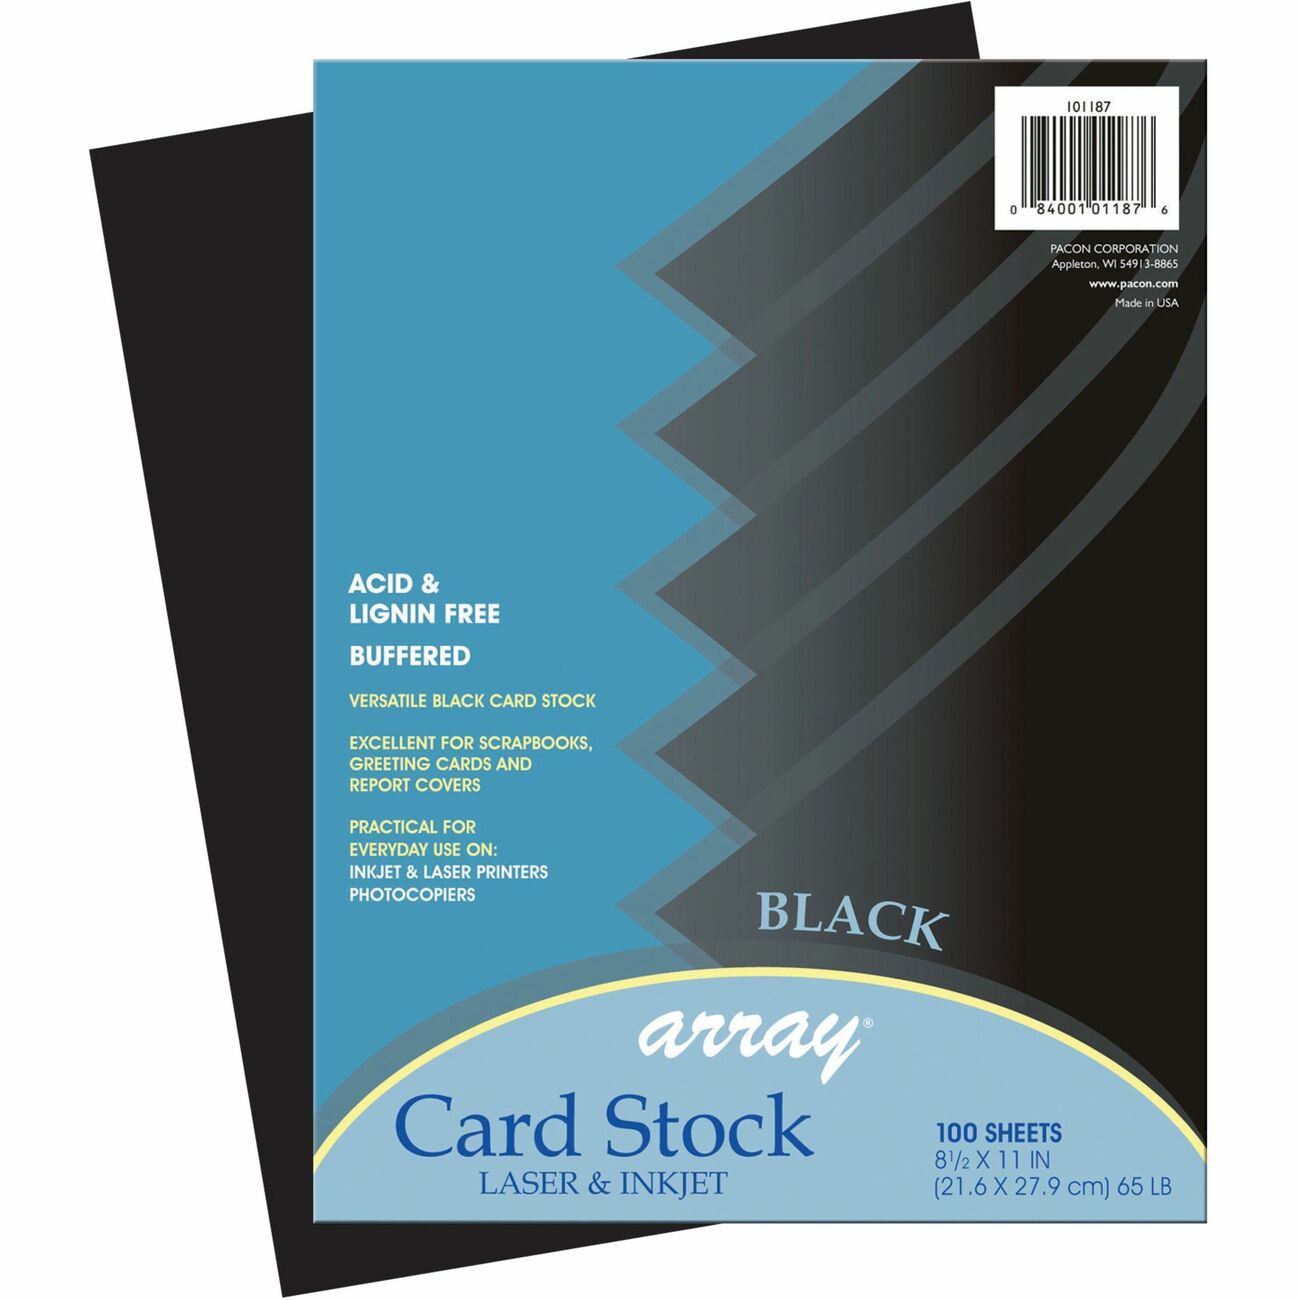 Springhill Multipurpose Cardstock - White - 92 Brightness - 97% Opacity -  Letter - 8 1/2 x 11 - 67 lb Basis Weight - Soft, Toothy - 1 / Pack -  Acid-free, Die-cut, Foldable, Pre-scored, Fast-drying